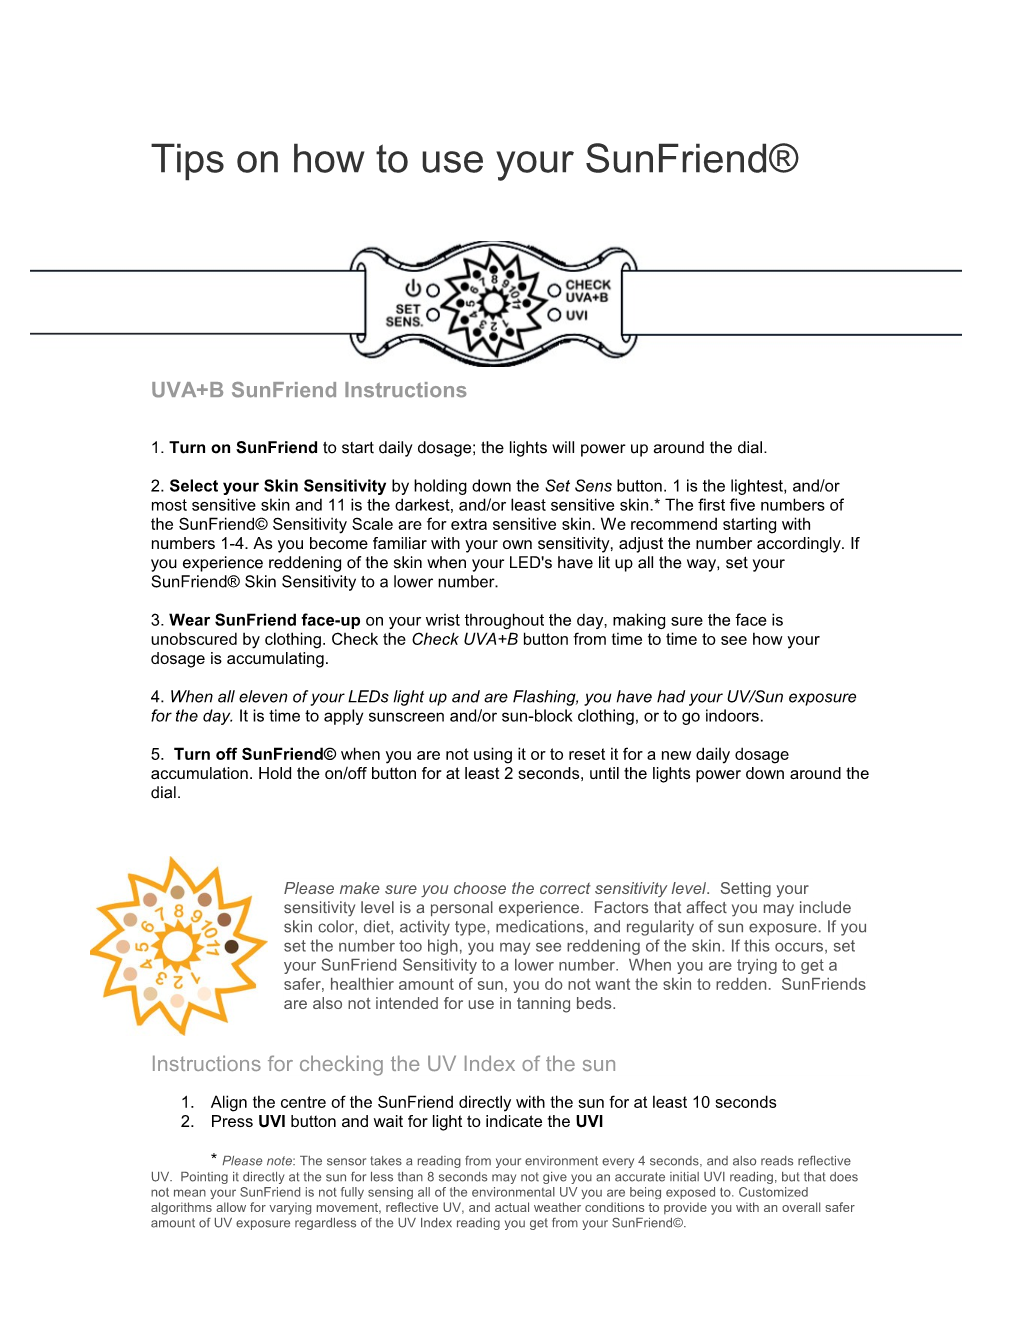 Tips on How to Use Your Sunfriend